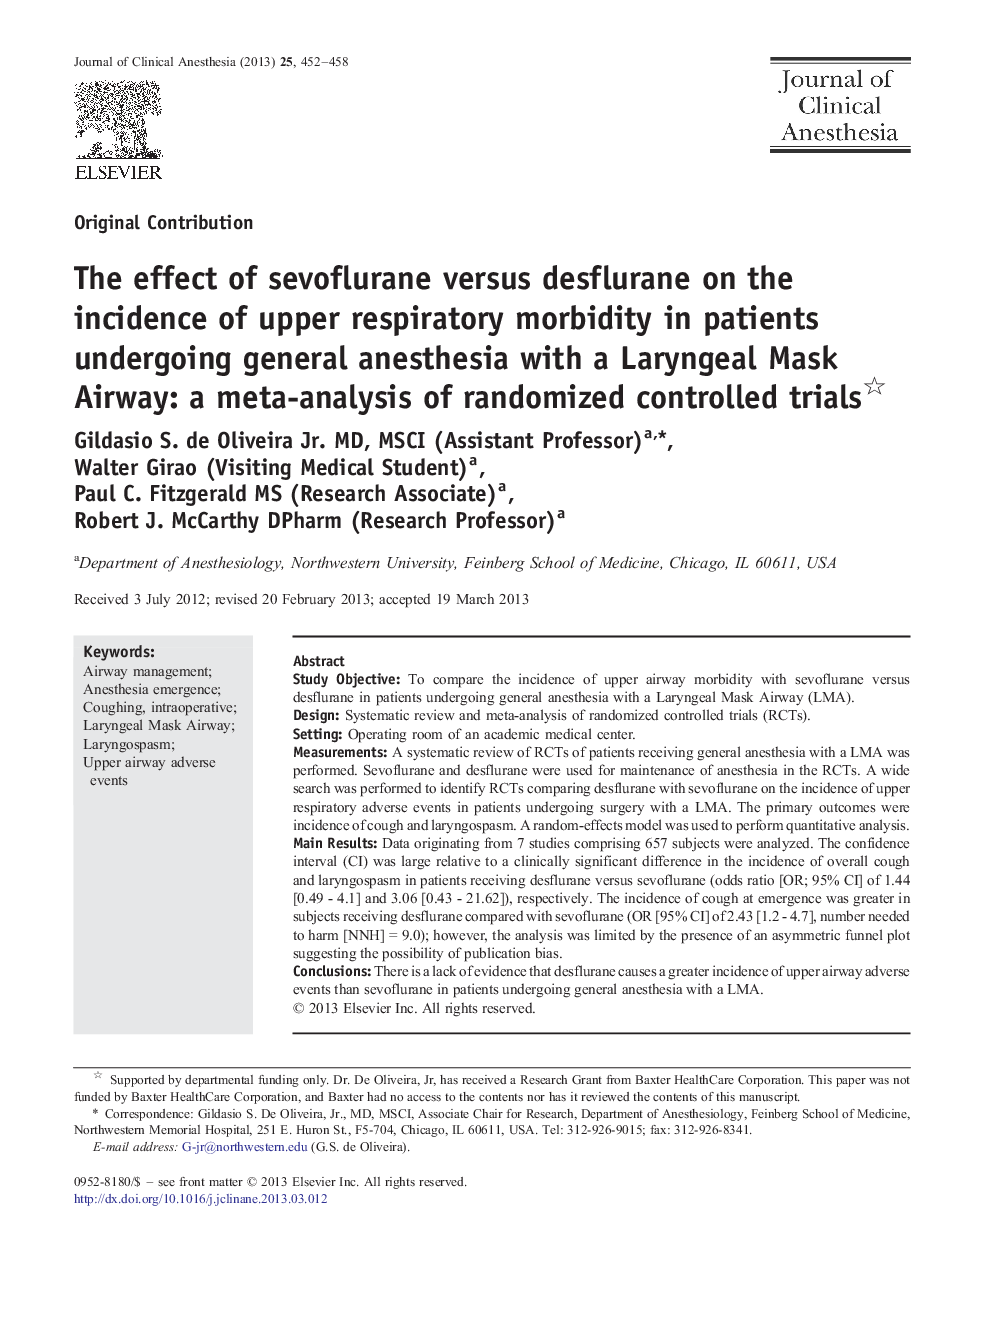 The effect of sevoflurane versus desflurane on the incidence of upper respiratory morbidity in patients undergoing general anesthesia with a Laryngeal Mask Airway: a meta-analysis of randomized controlled trials 